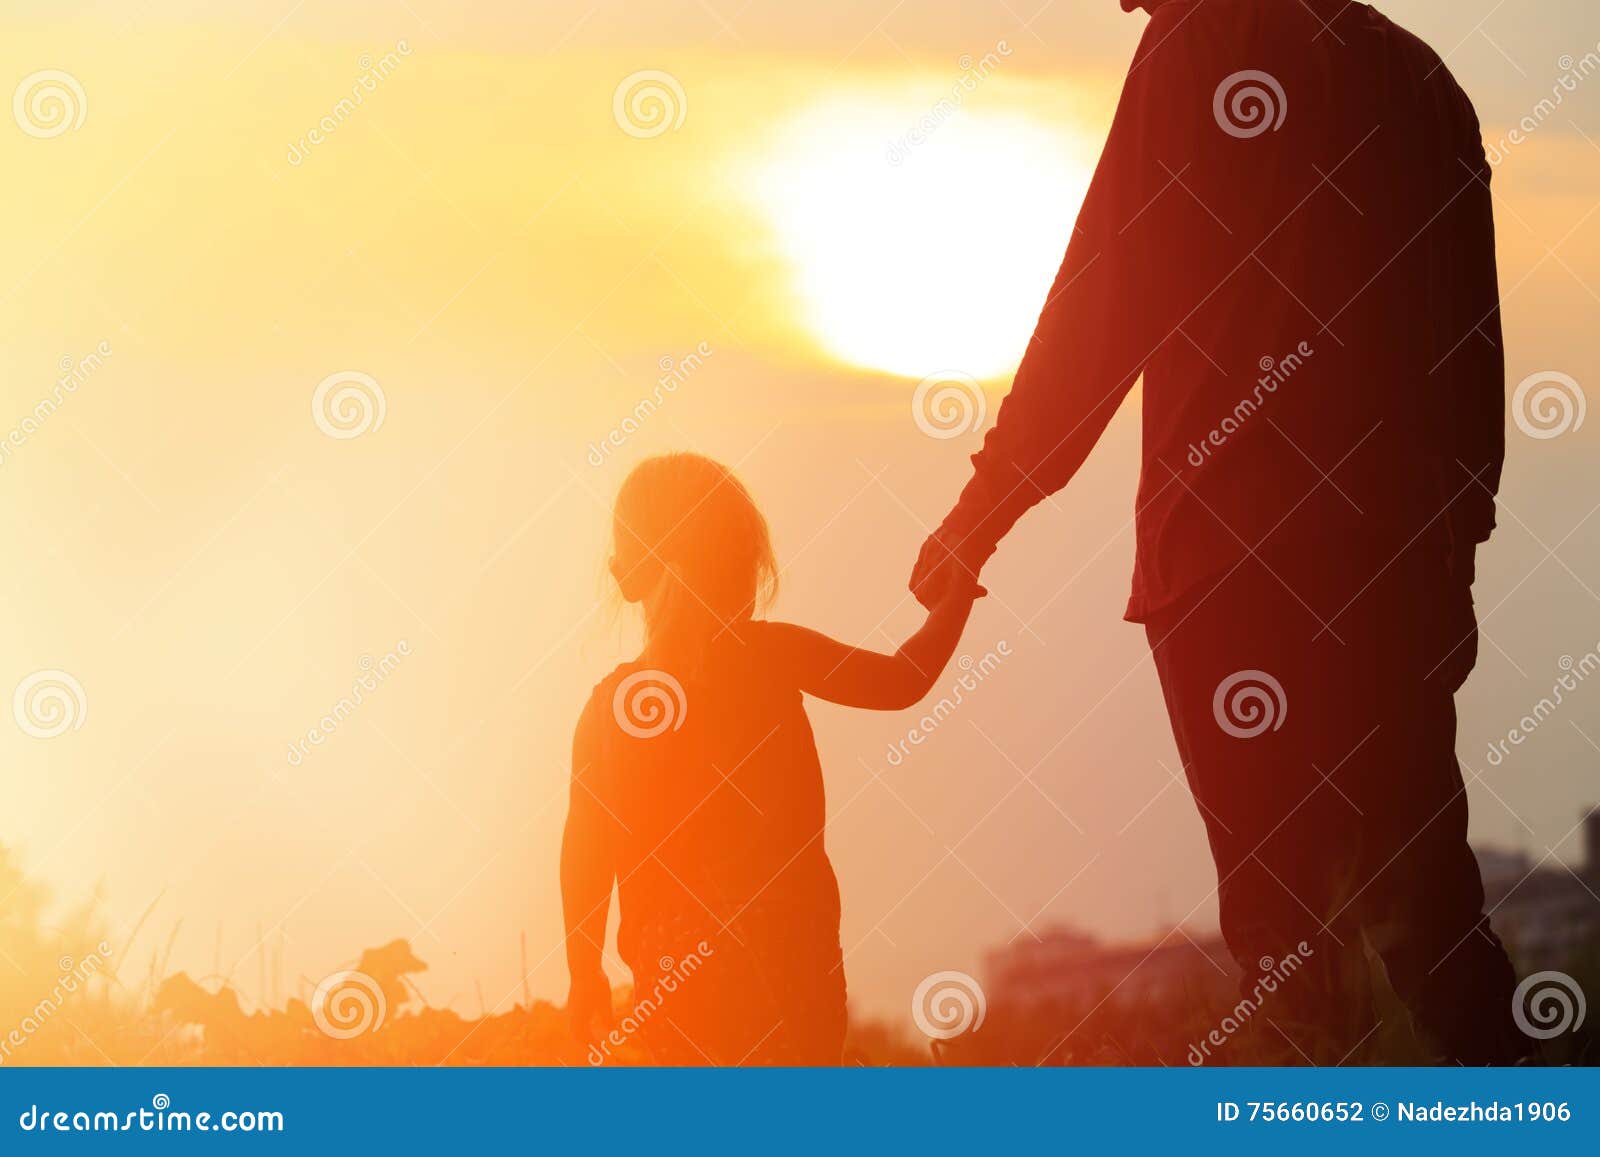 15,673 Father Daughter Holding Hands Stock Photos - Free & Royalty ...